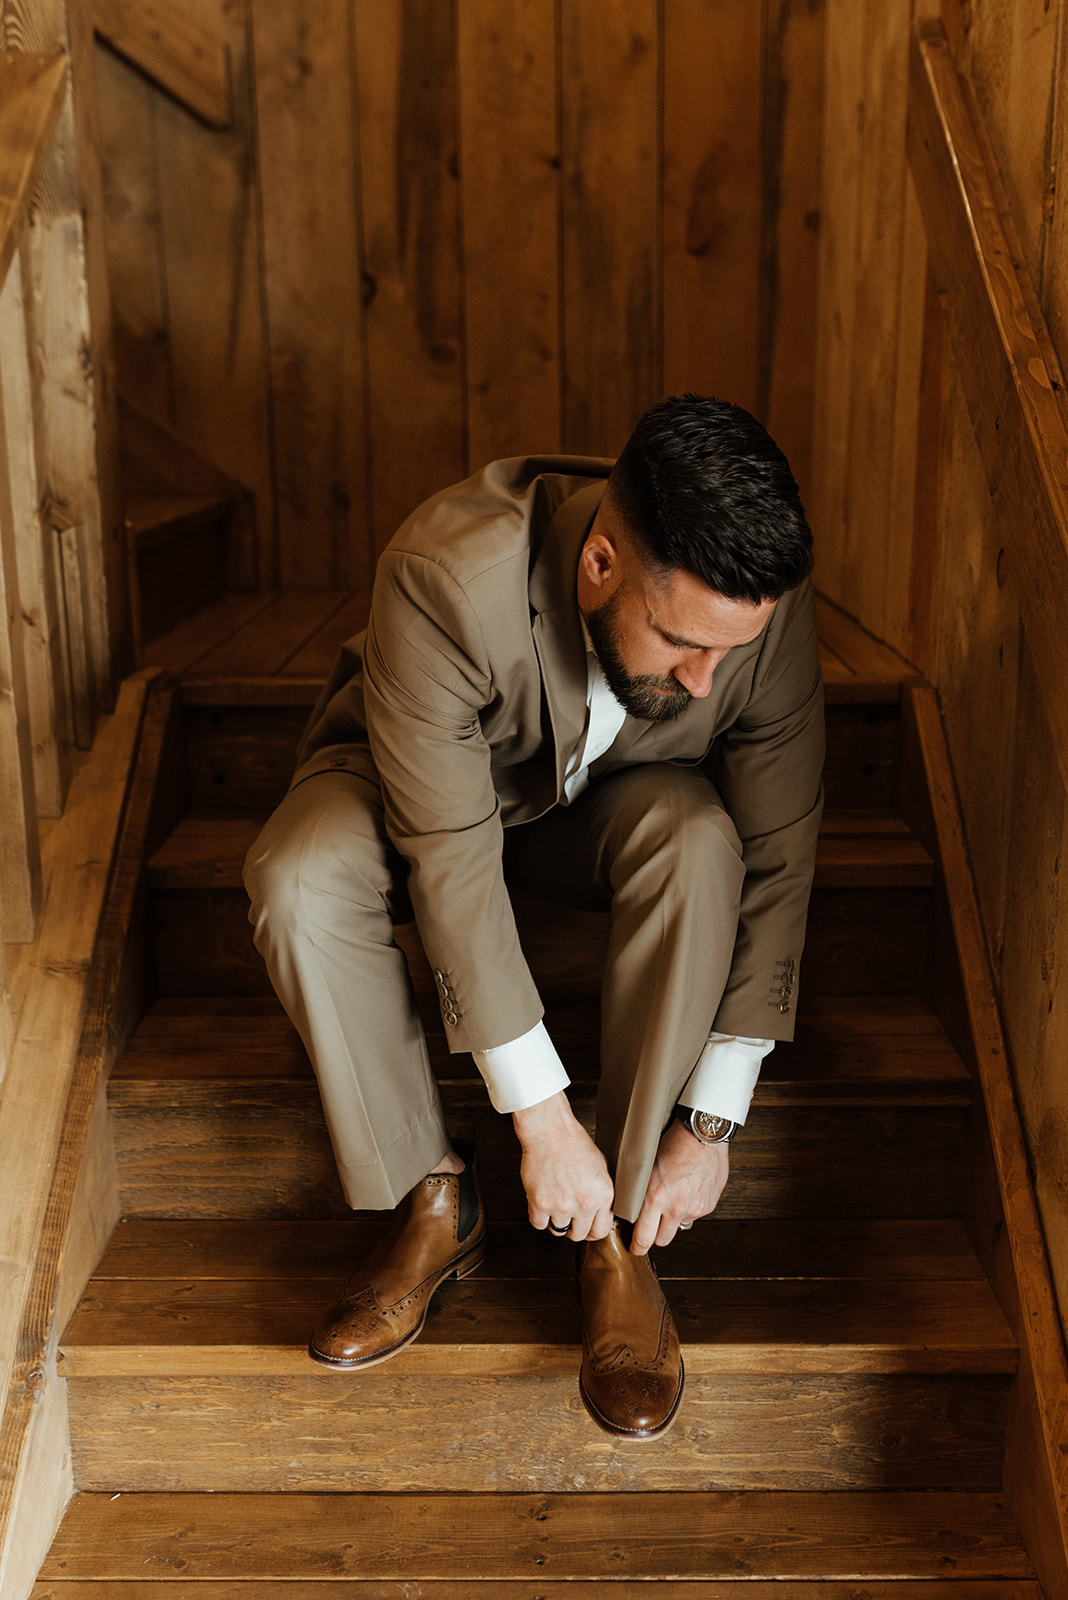 rustic chic barn wedding with warm wood tones, groom attire inspiration, brown suit